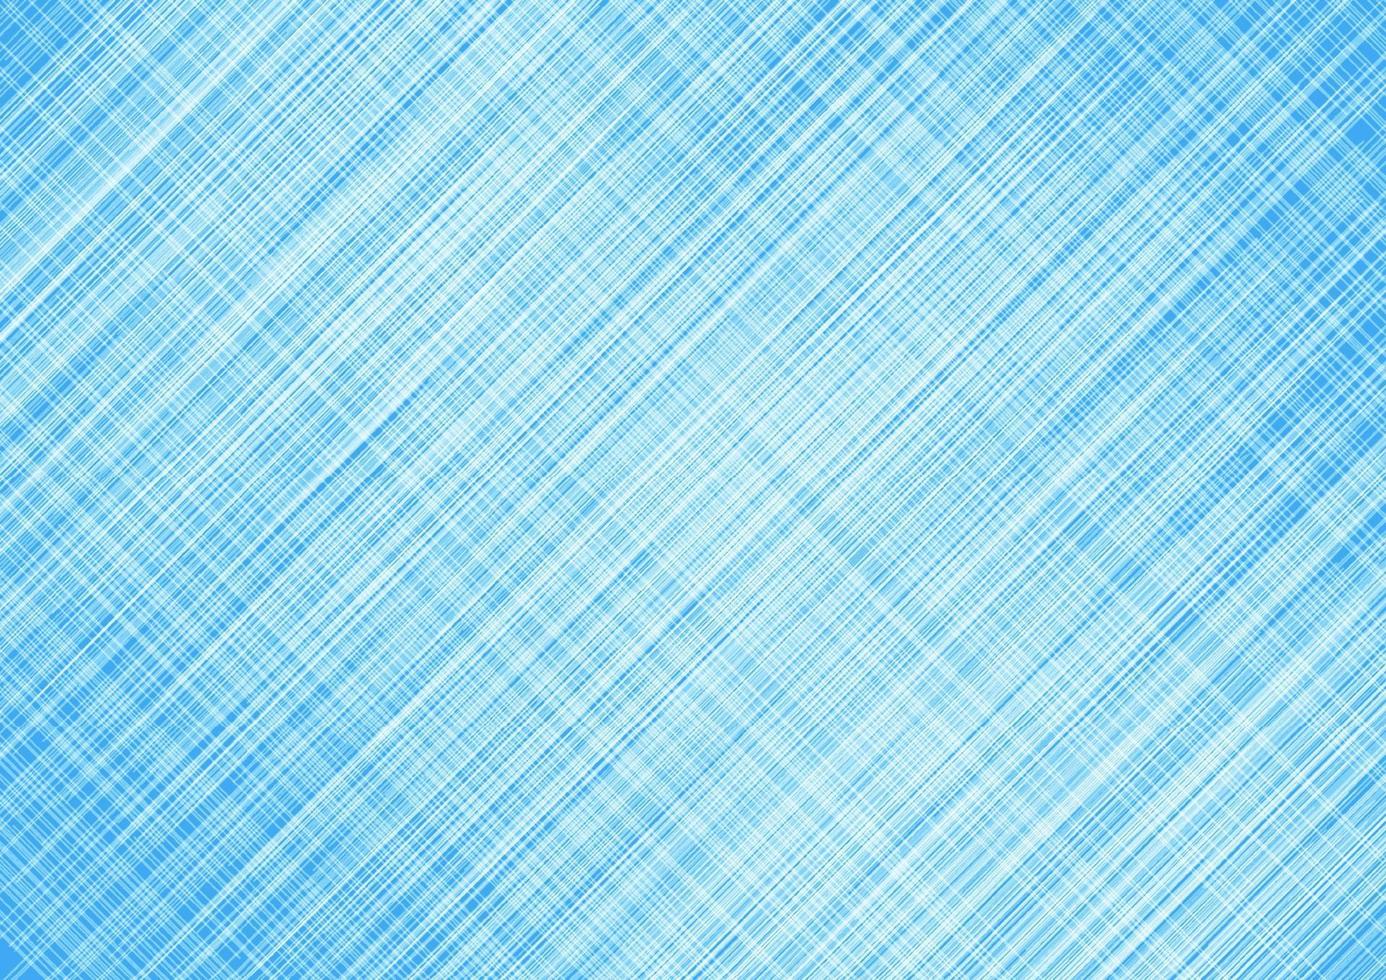 Abstract blue background with white grid lines scratch texture. vector